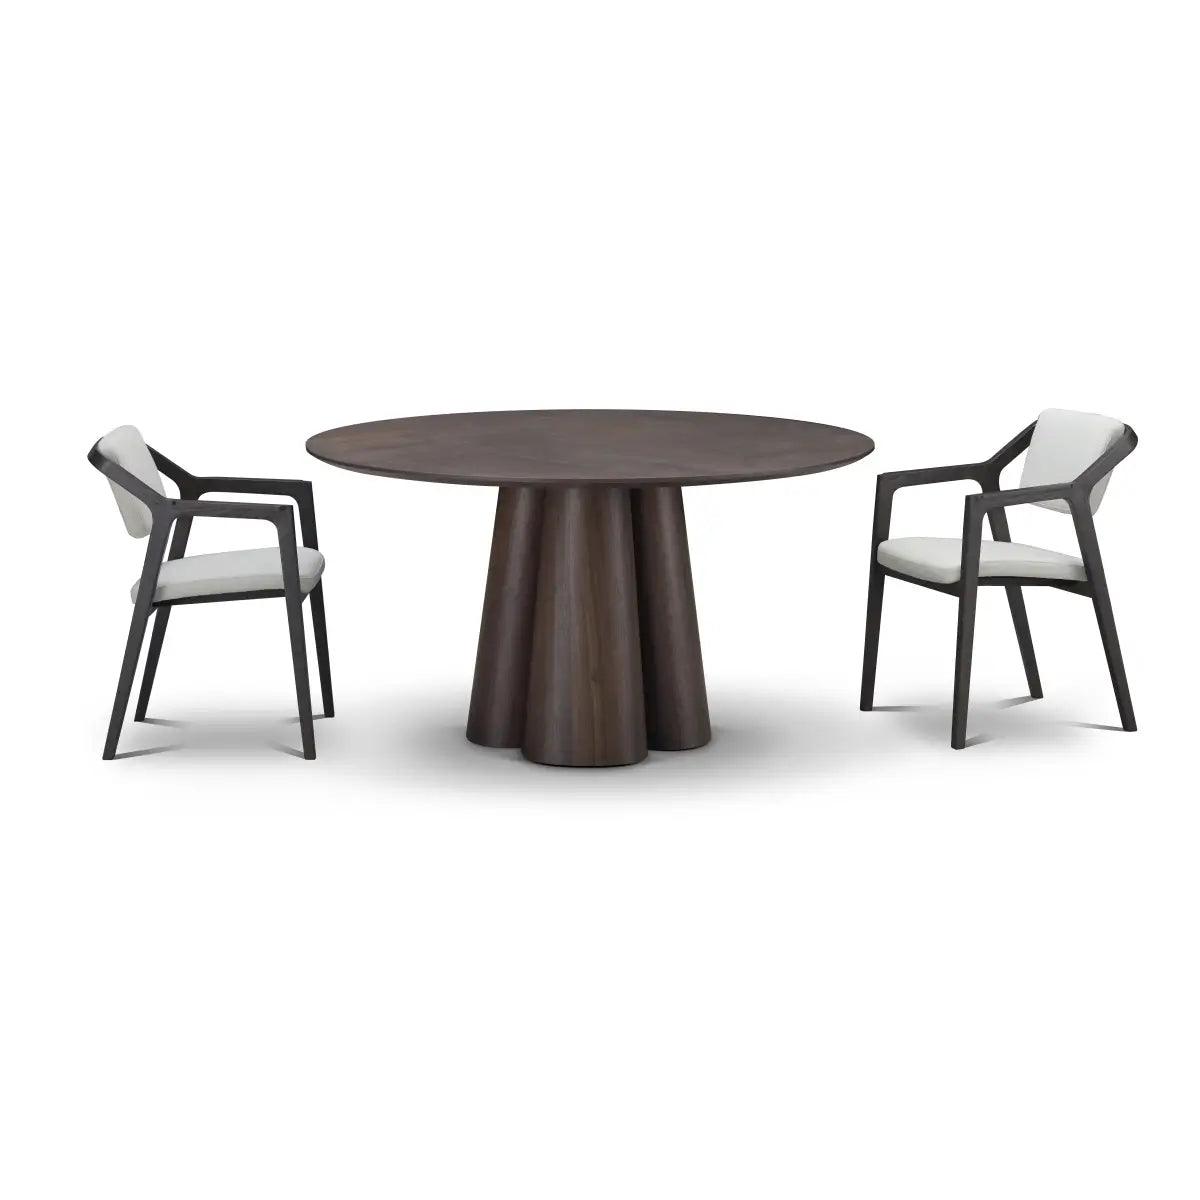 Strata Round Walnut Leaf Dining Table 140cm by Eccotrading Design London - Maison Rêves UK